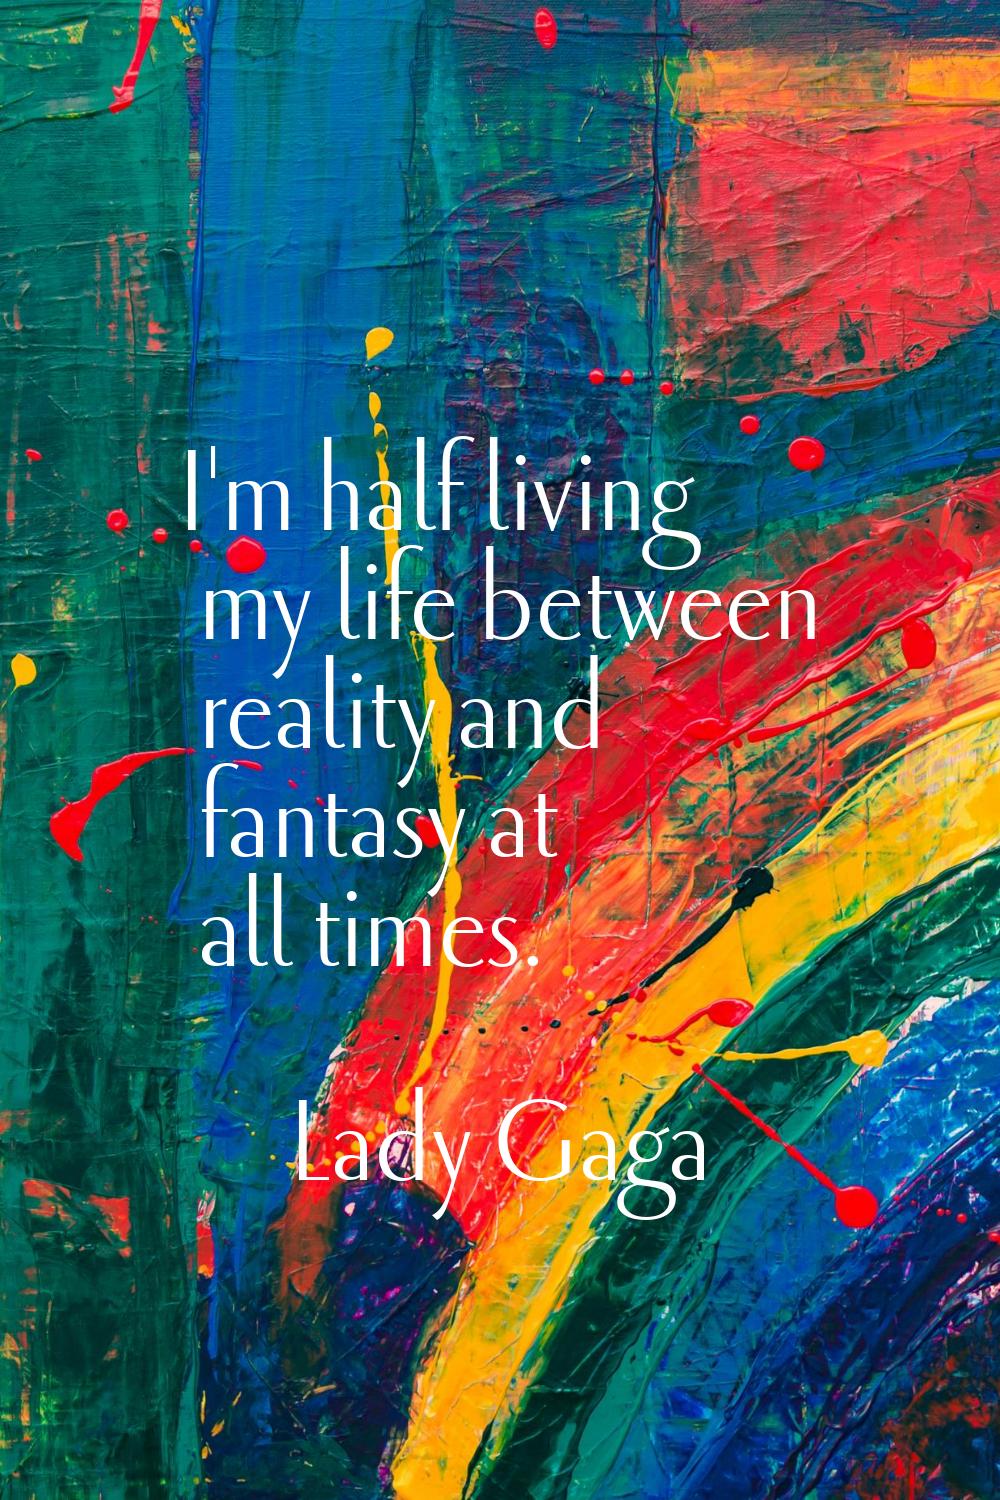 I'm half living my life between reality and fantasy at all times.